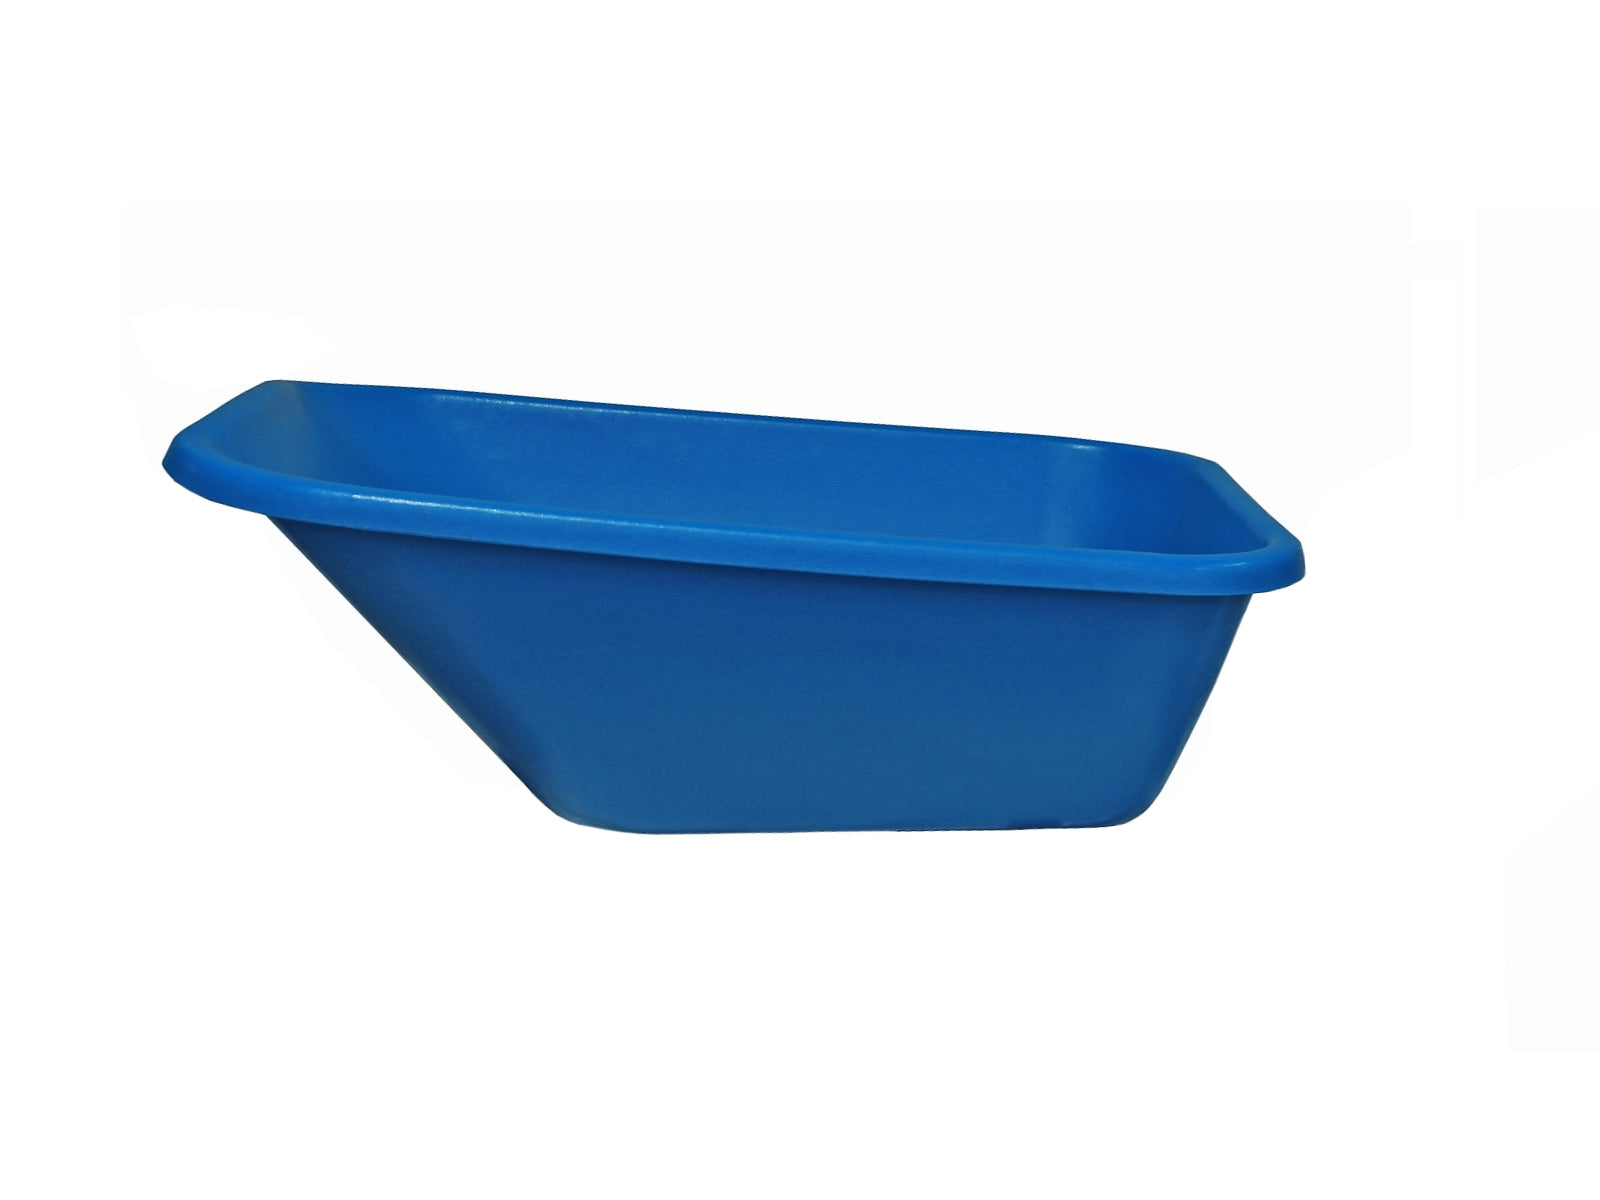 Replacement trough for compact cart (120 liters): PE trough in different colors